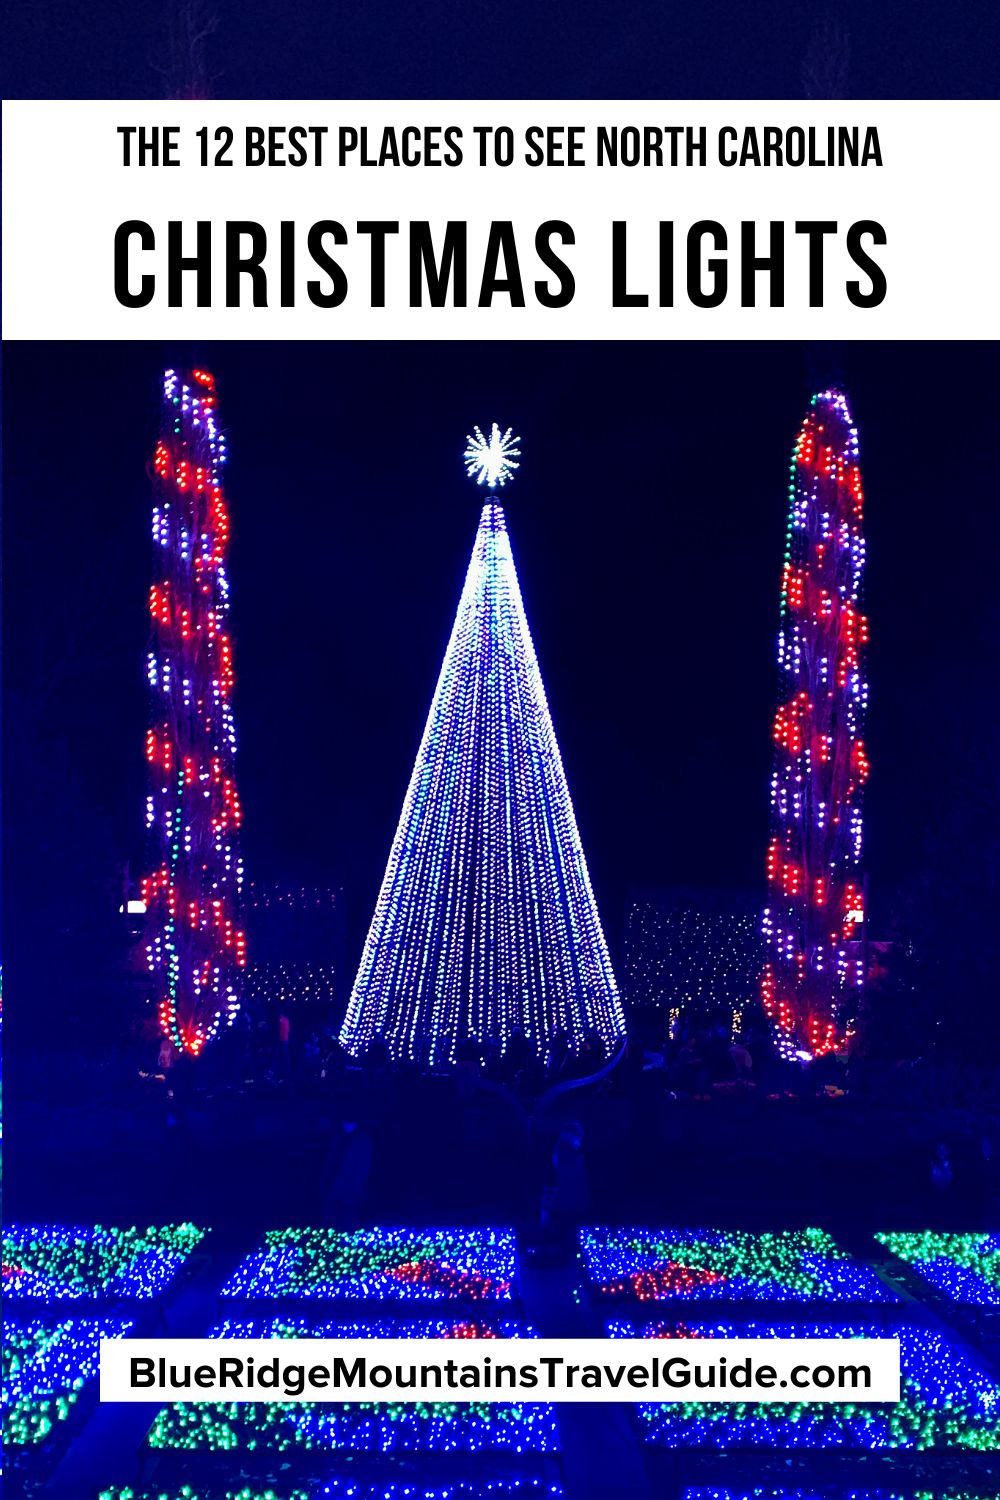 The 12 Best Places to See Christmas Lights in North Carolina